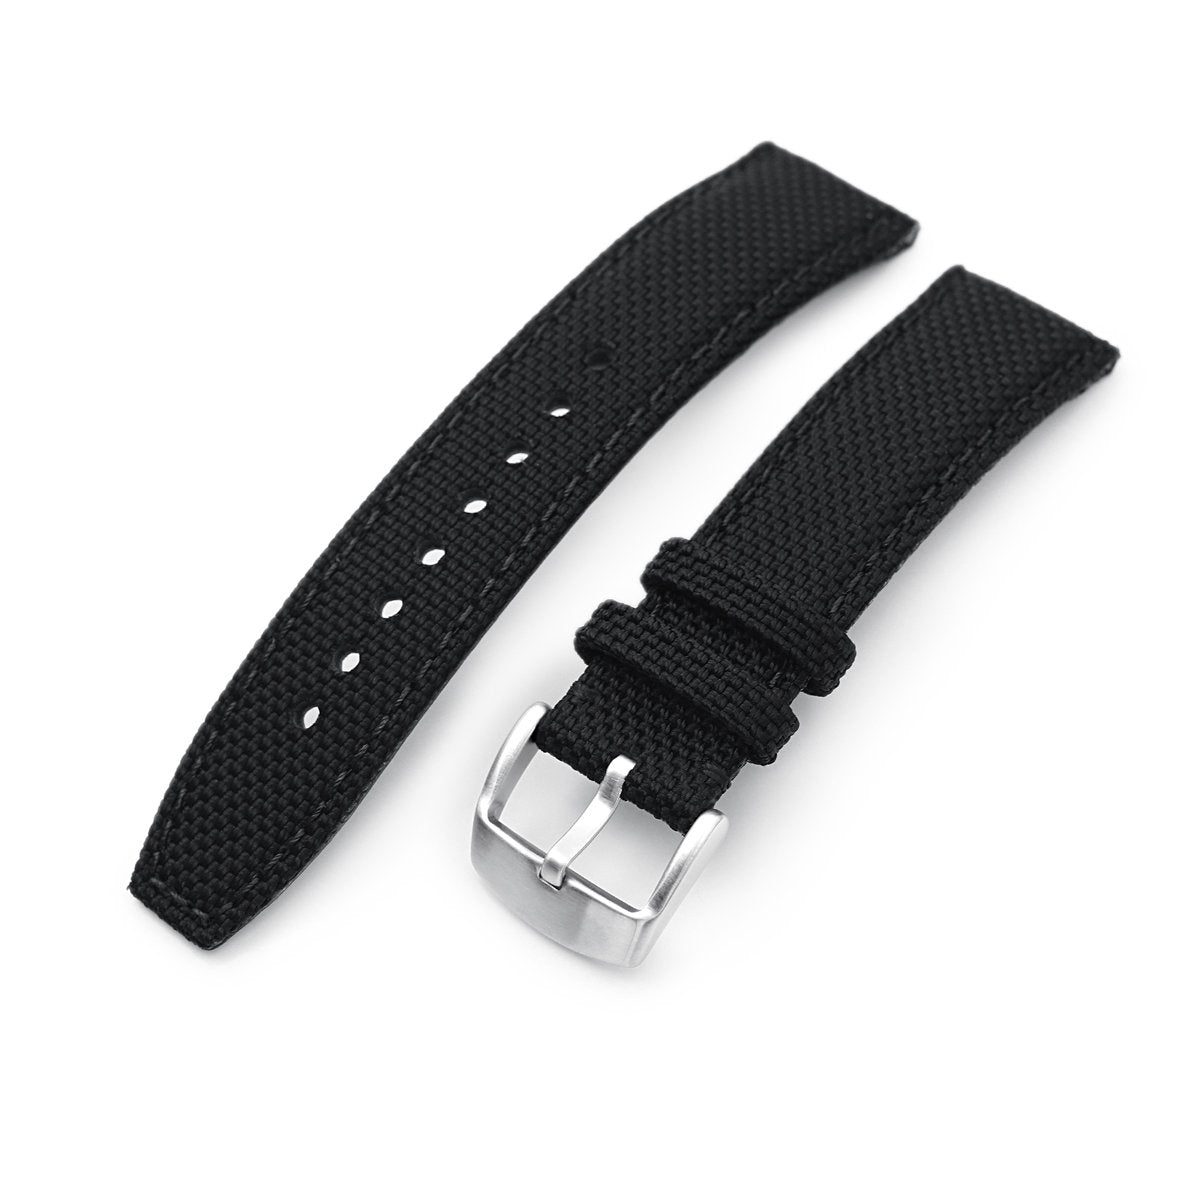 20mm 21mm or 22mm Strong Texture Woven Nylon Black Watch Strap Brushed Strapcode Watch Bands